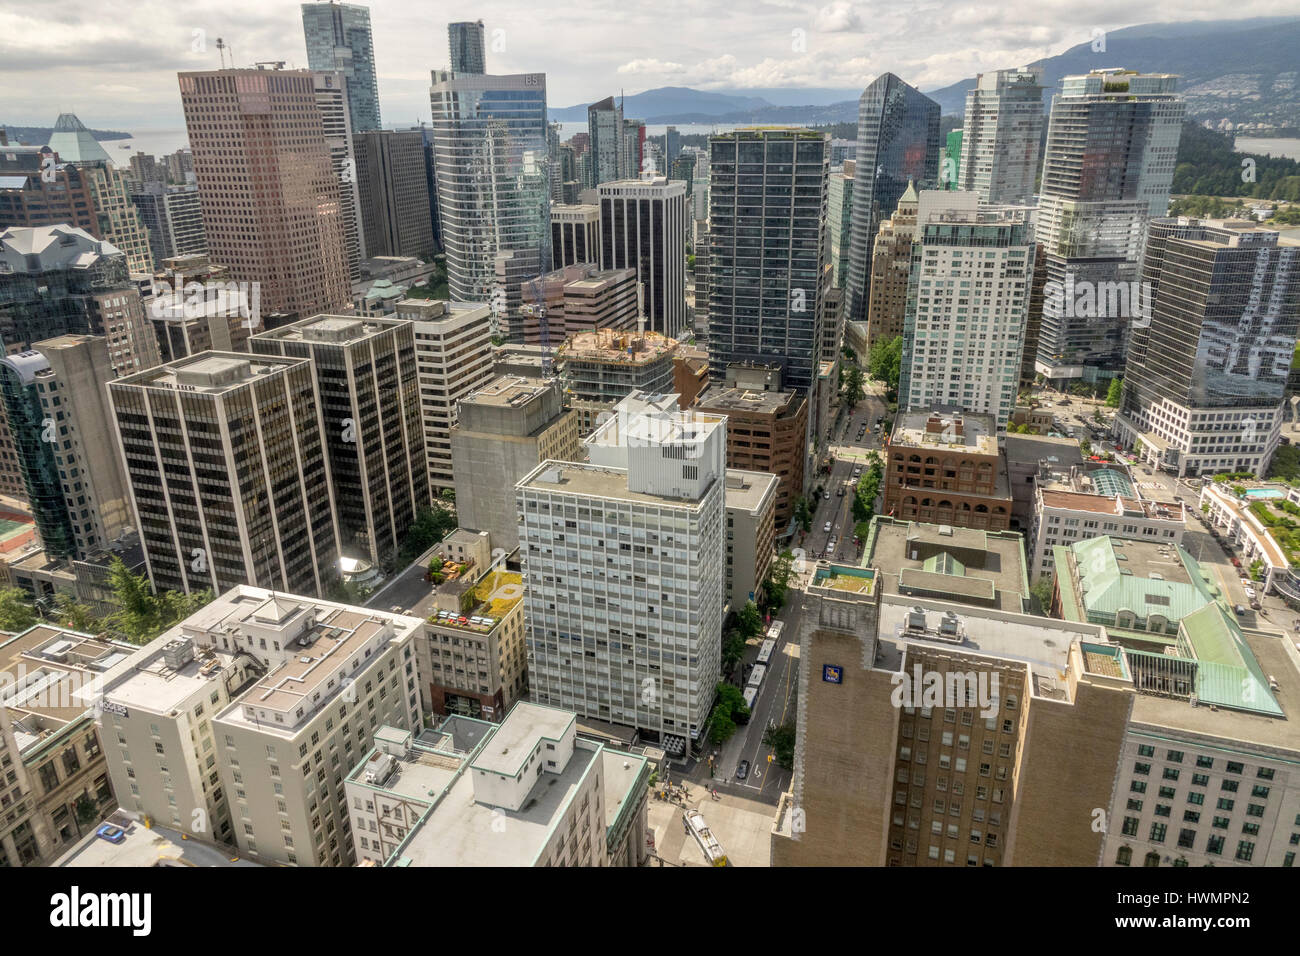 Aerial View Of Downtown Vancouver Canada With Apartment Buildings And Office Towers Stock Photo